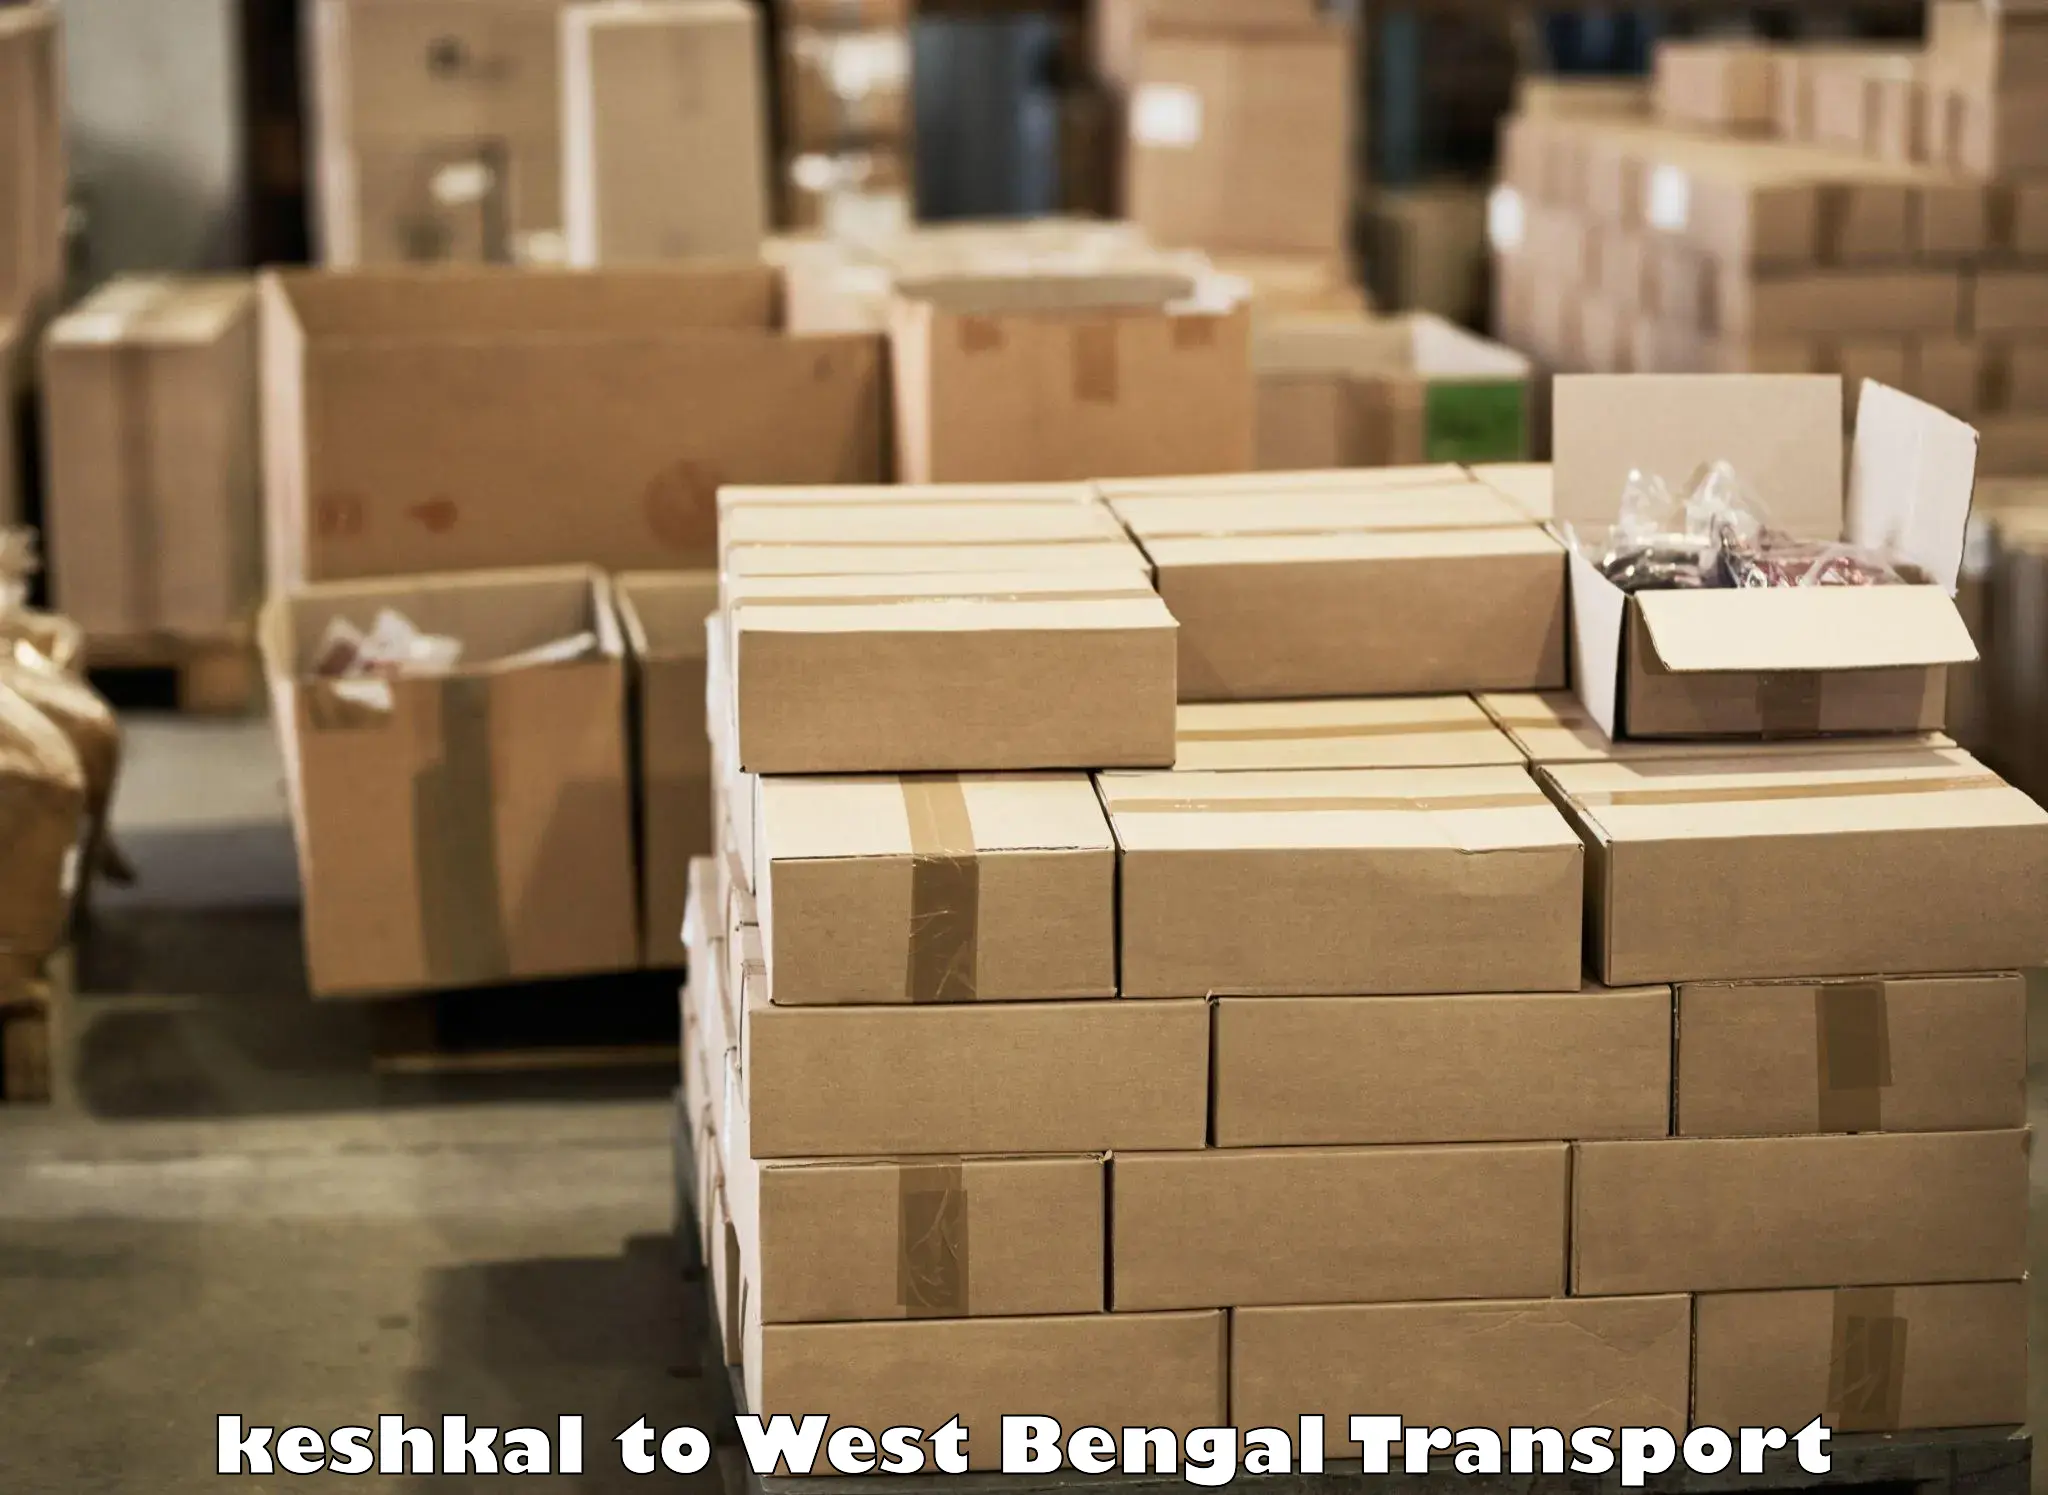 Container transport service keshkal to West Bengal